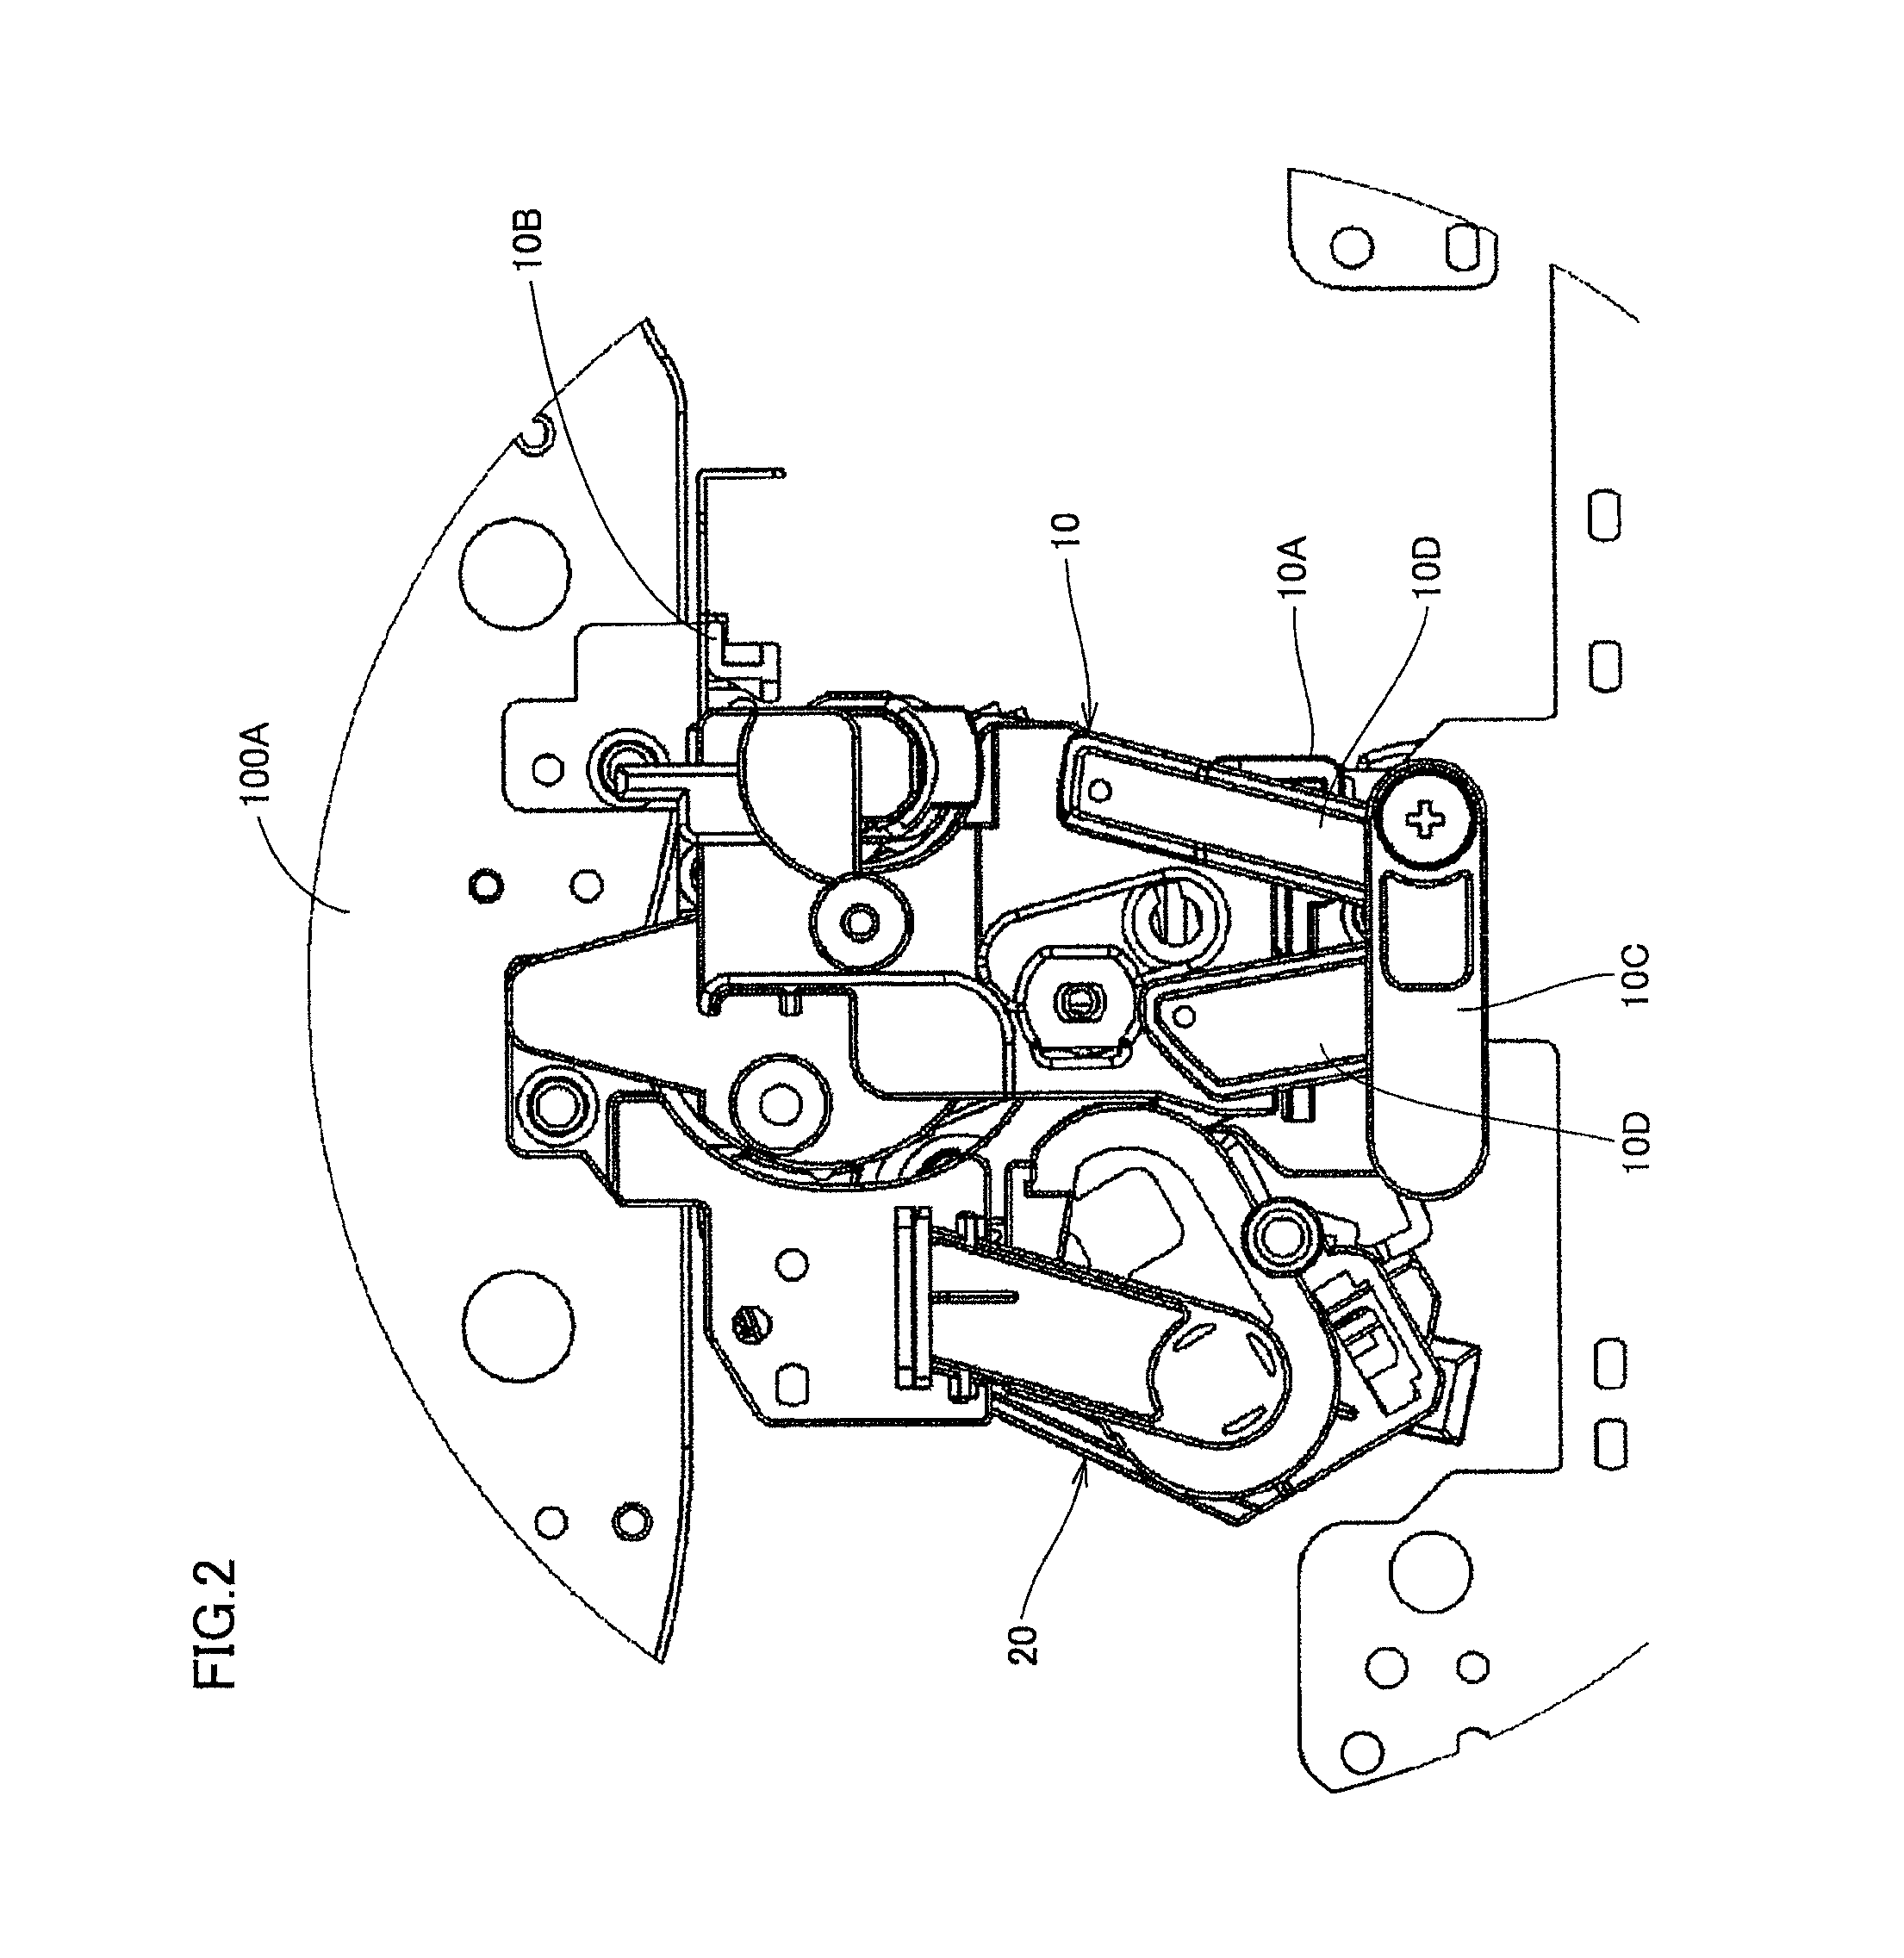 Image forming apparatus with improved accuracy in forming a gap between a developing unit and a photoreceptor drum